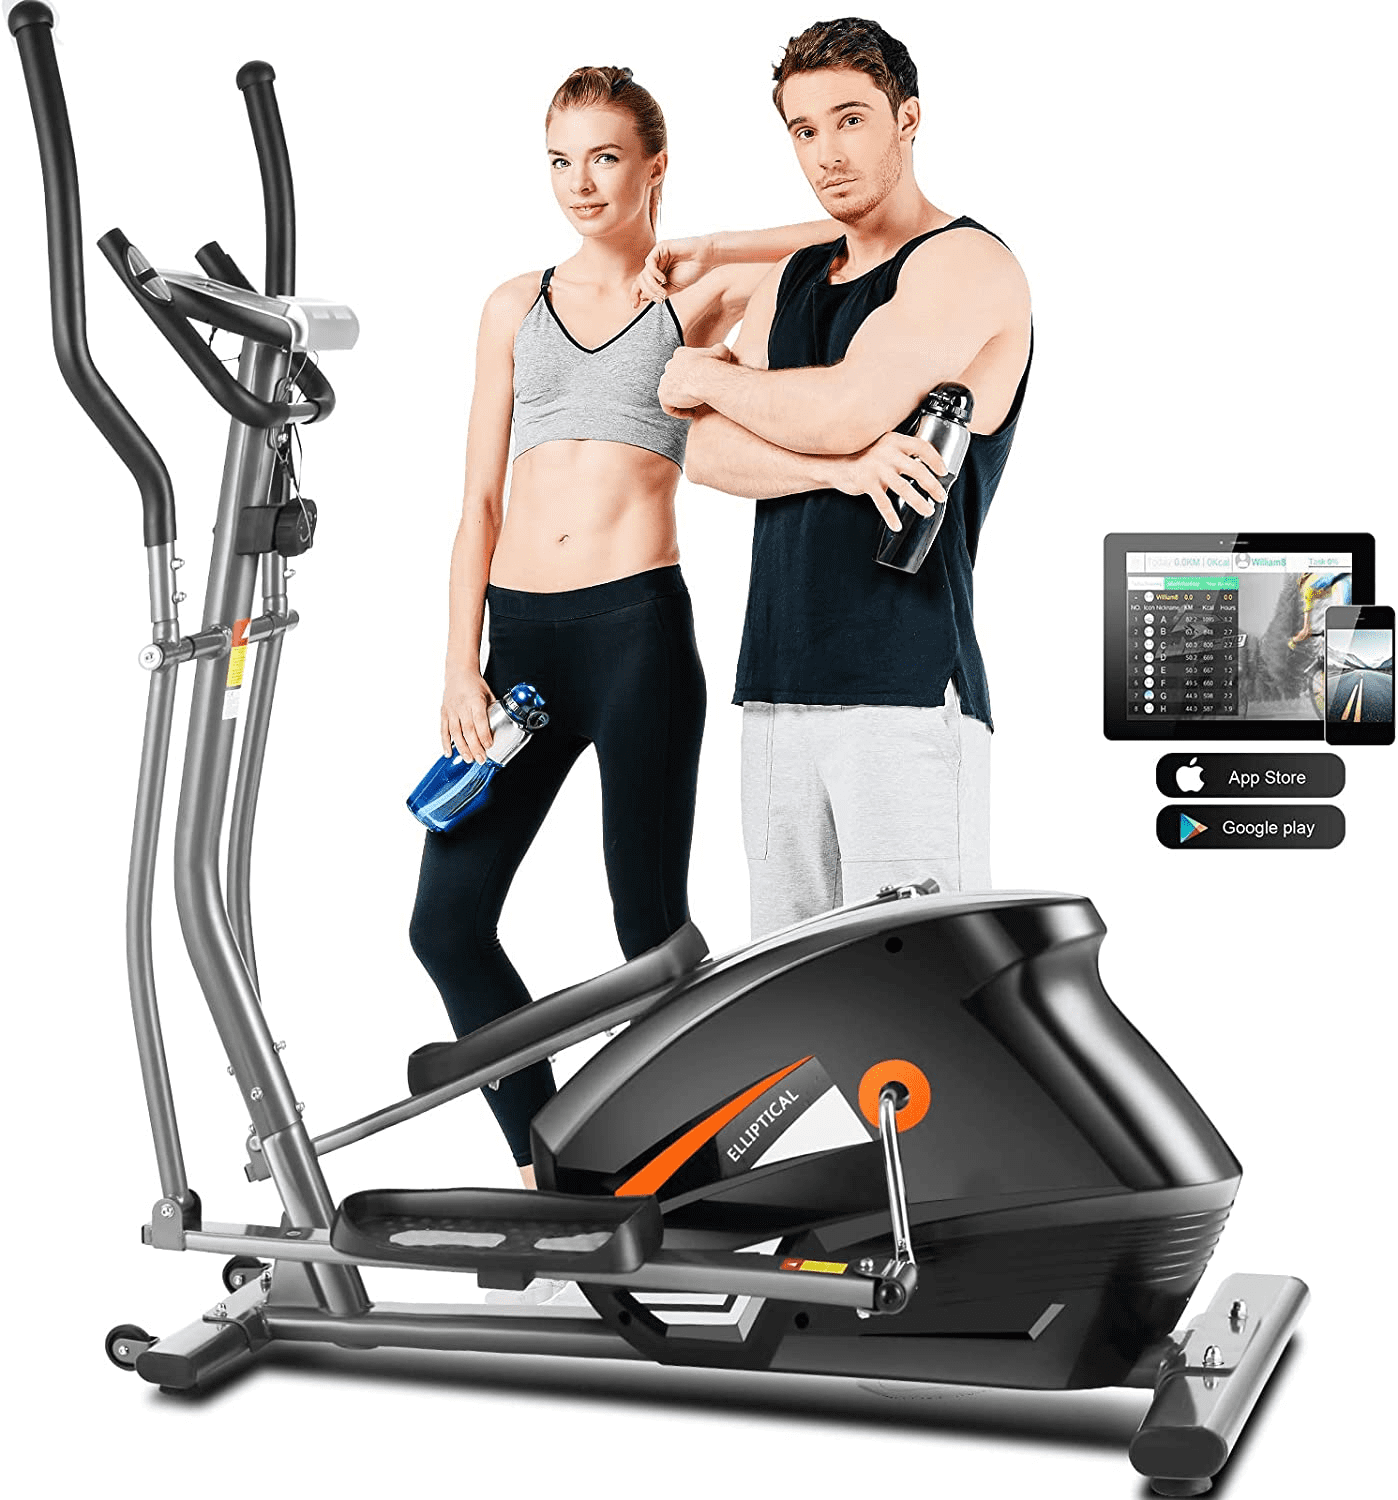 Quiet & Smooth Driven Magnetic Elliptical Cross Trainer Machine with 10 Levels Resistance and 35lb Flywheel ANCHEER Elliptical Machine Best Elliptical Exercise Machine for Home Gym Workout 